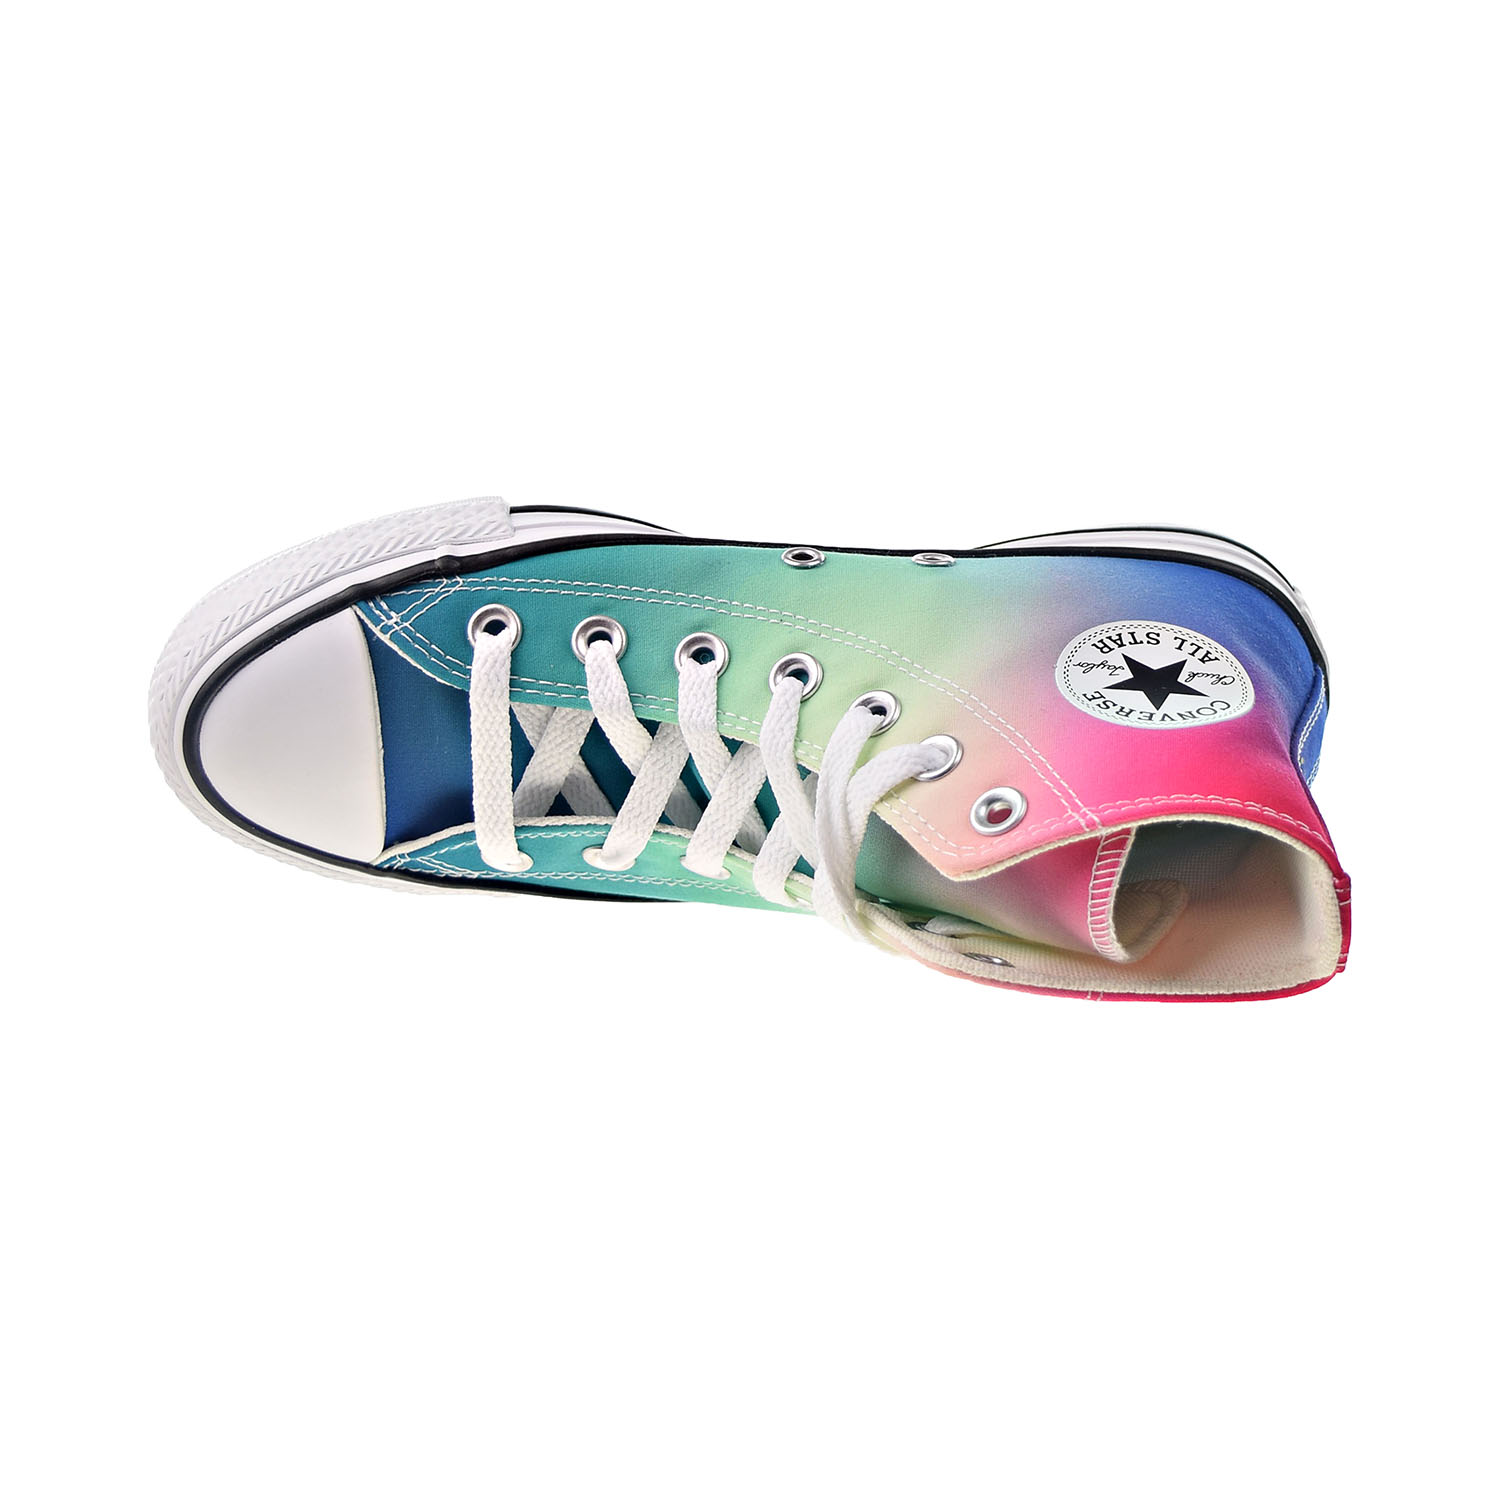 Converse Chuck Taylor All Star Hi "Psychadelic Hoops" Men's Shoes White 167592c - image 5 of 6